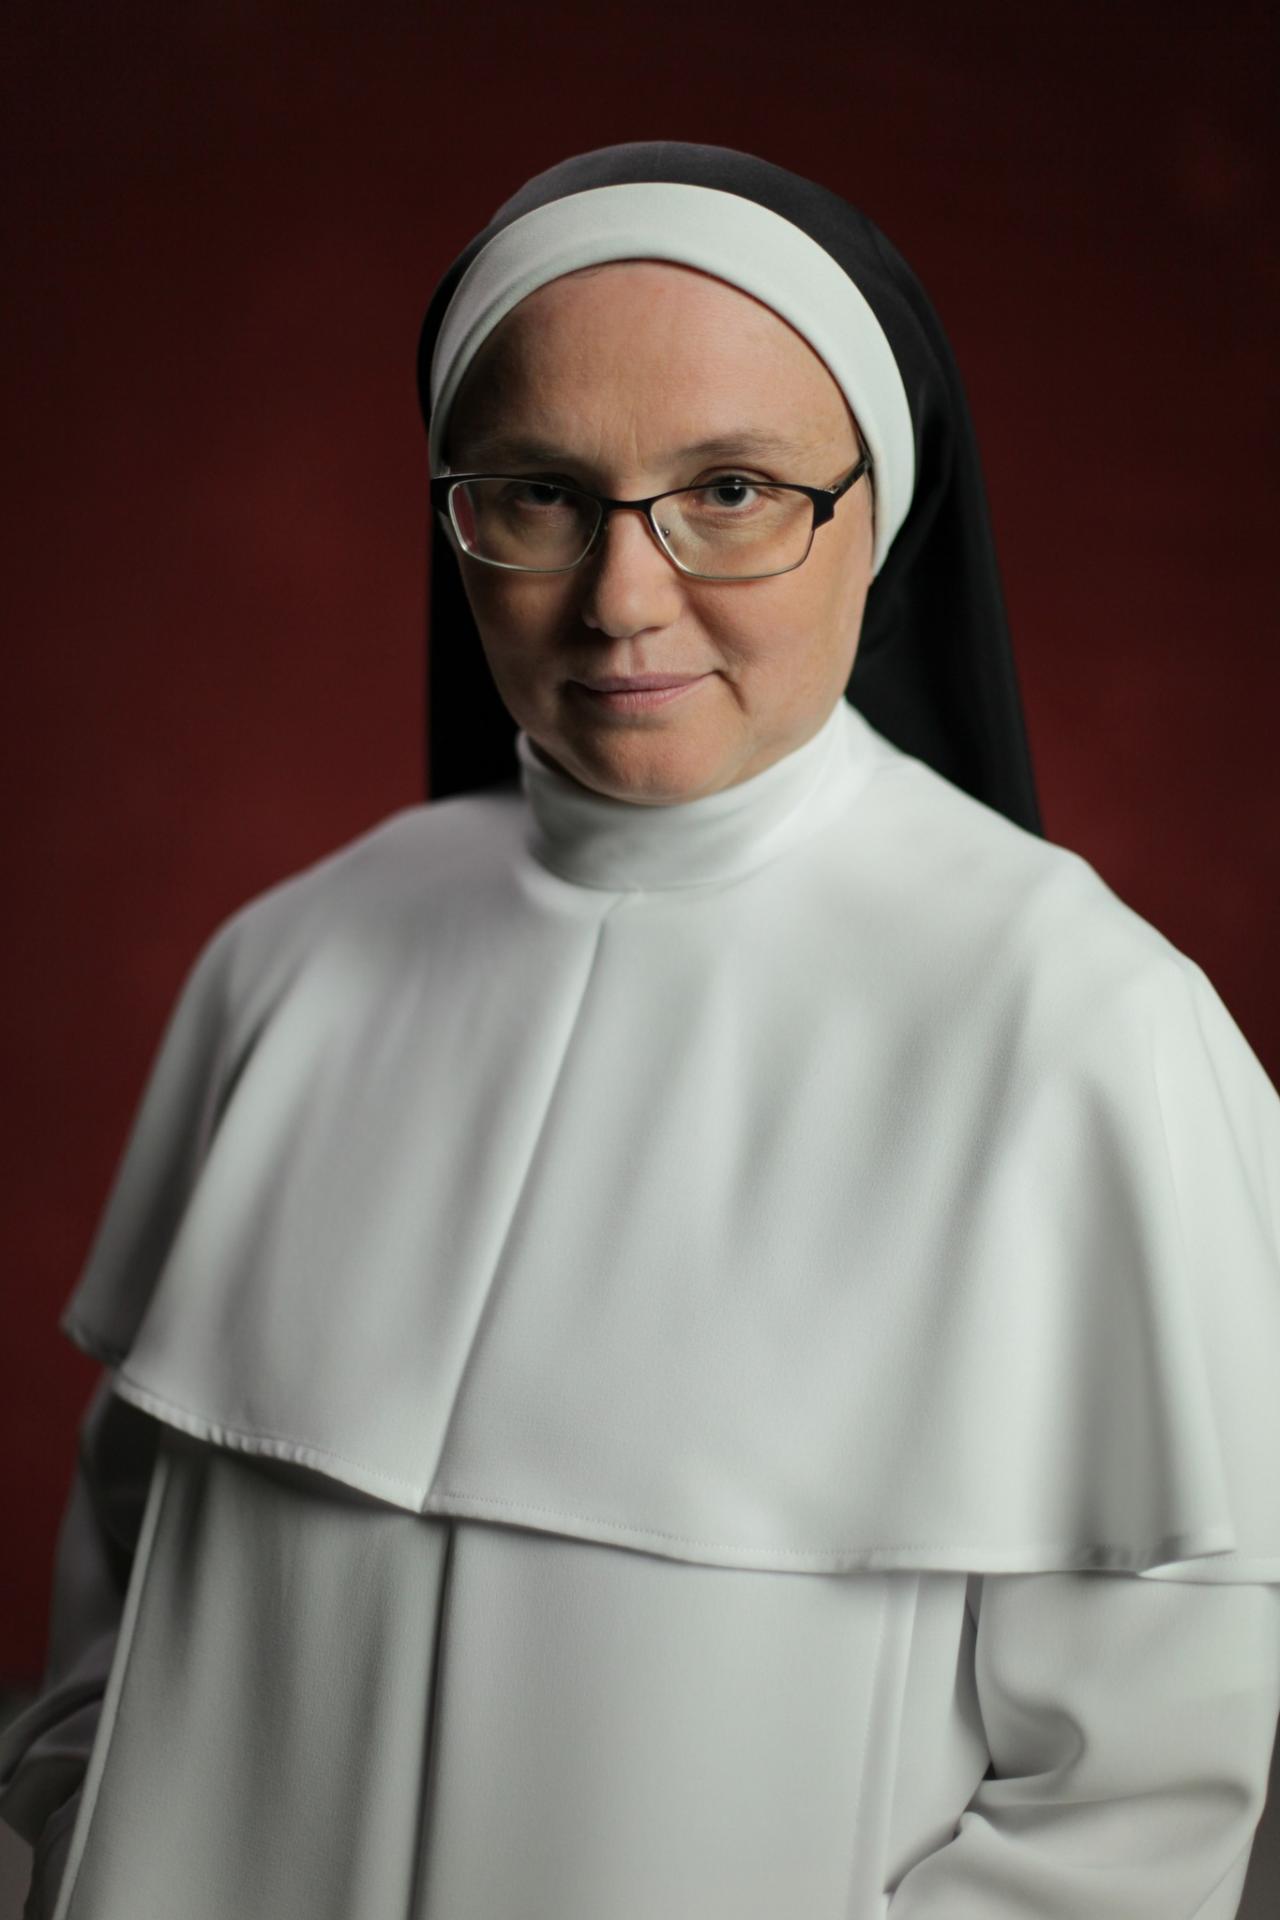 The film featured a nun from Wielopolska